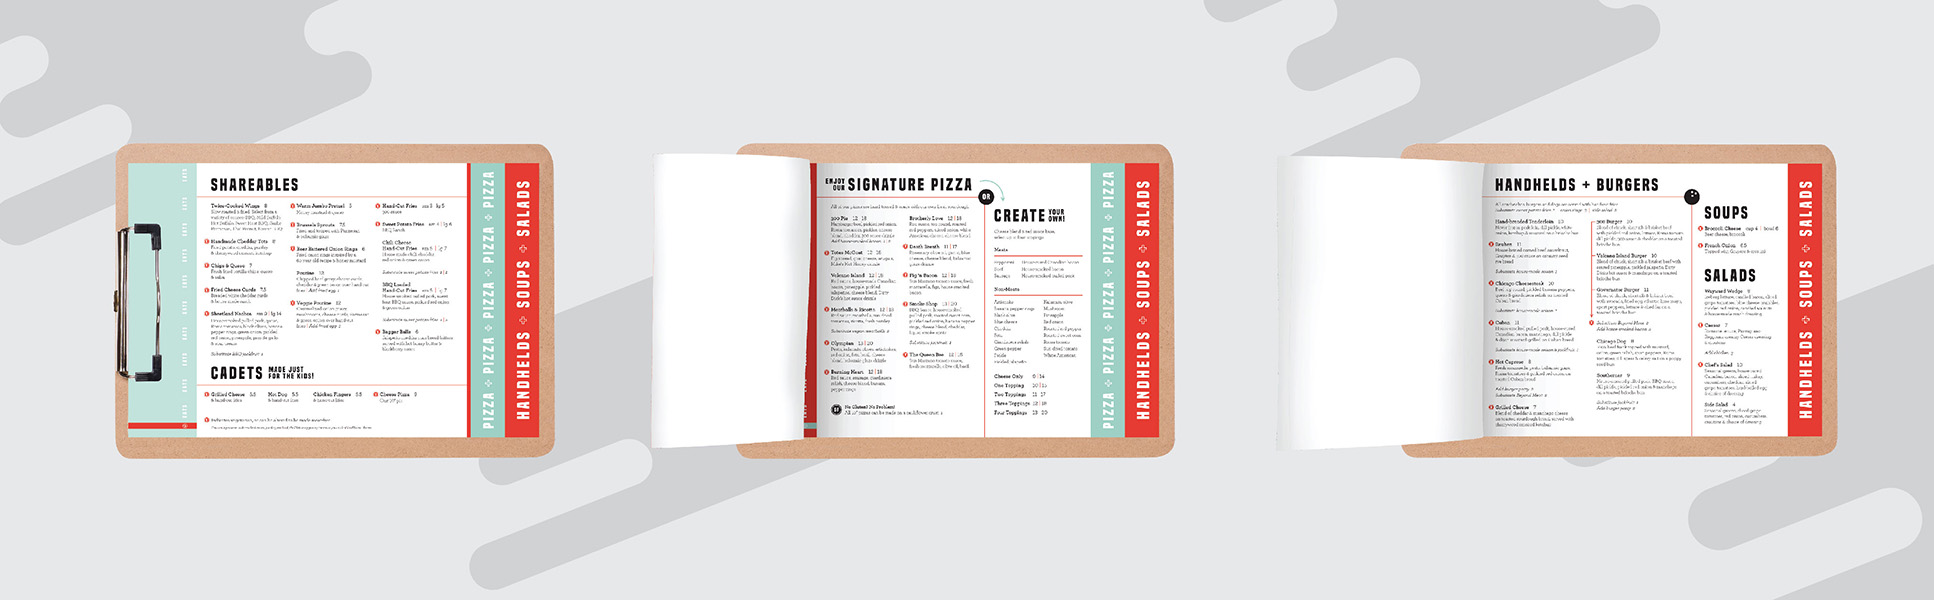 Three pages showing the menu for Wayward Social's restaurant